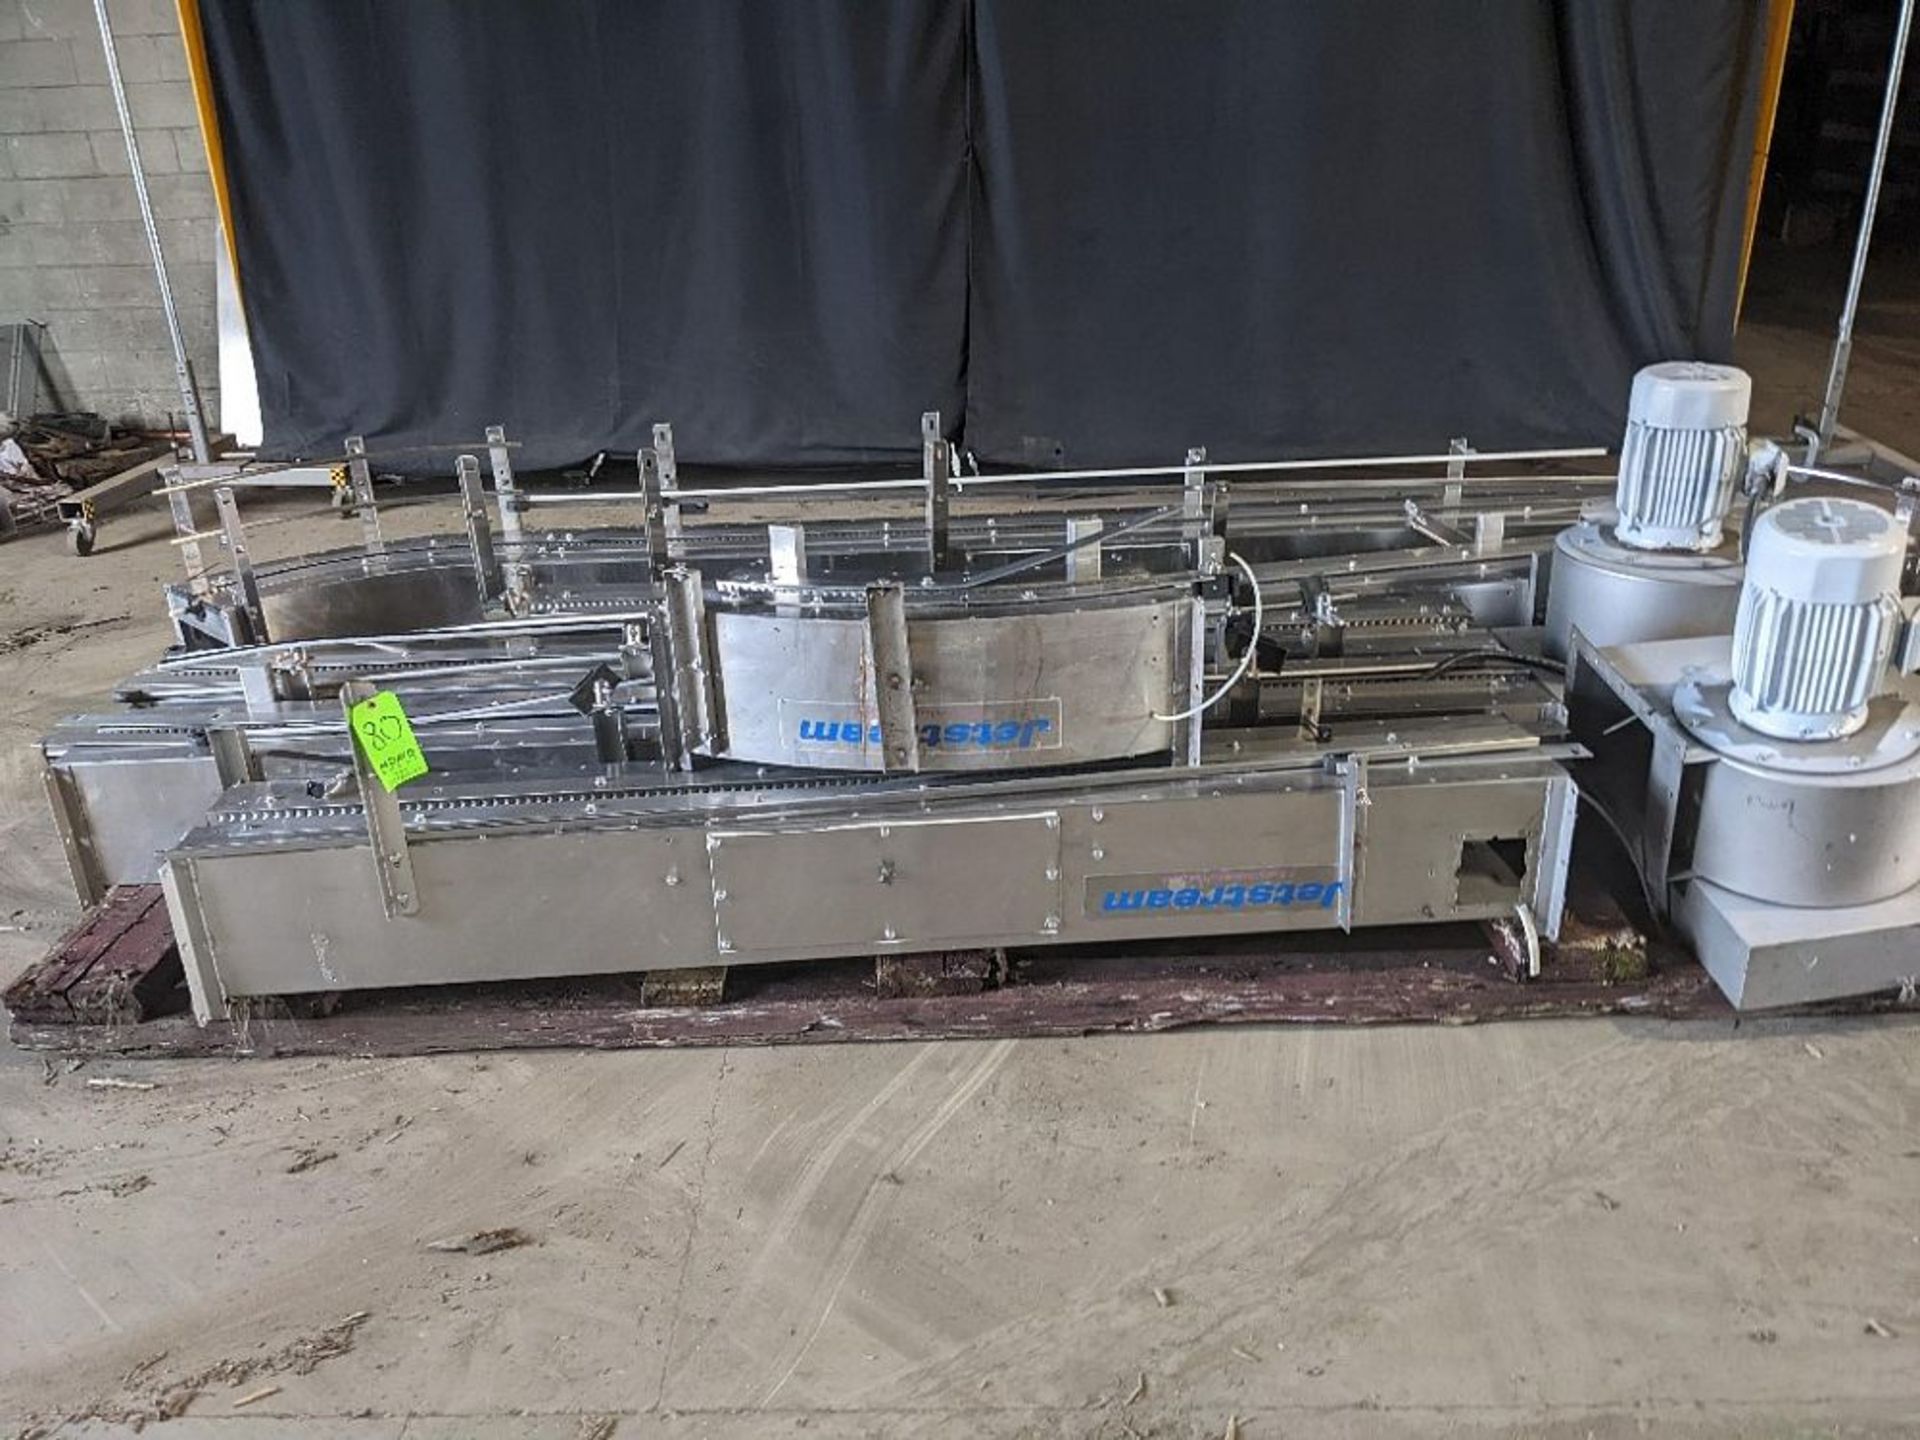 Jetstream Air Conveyor Sections - All Stainless Steel Construction - (8) Total: 1 section 147" L